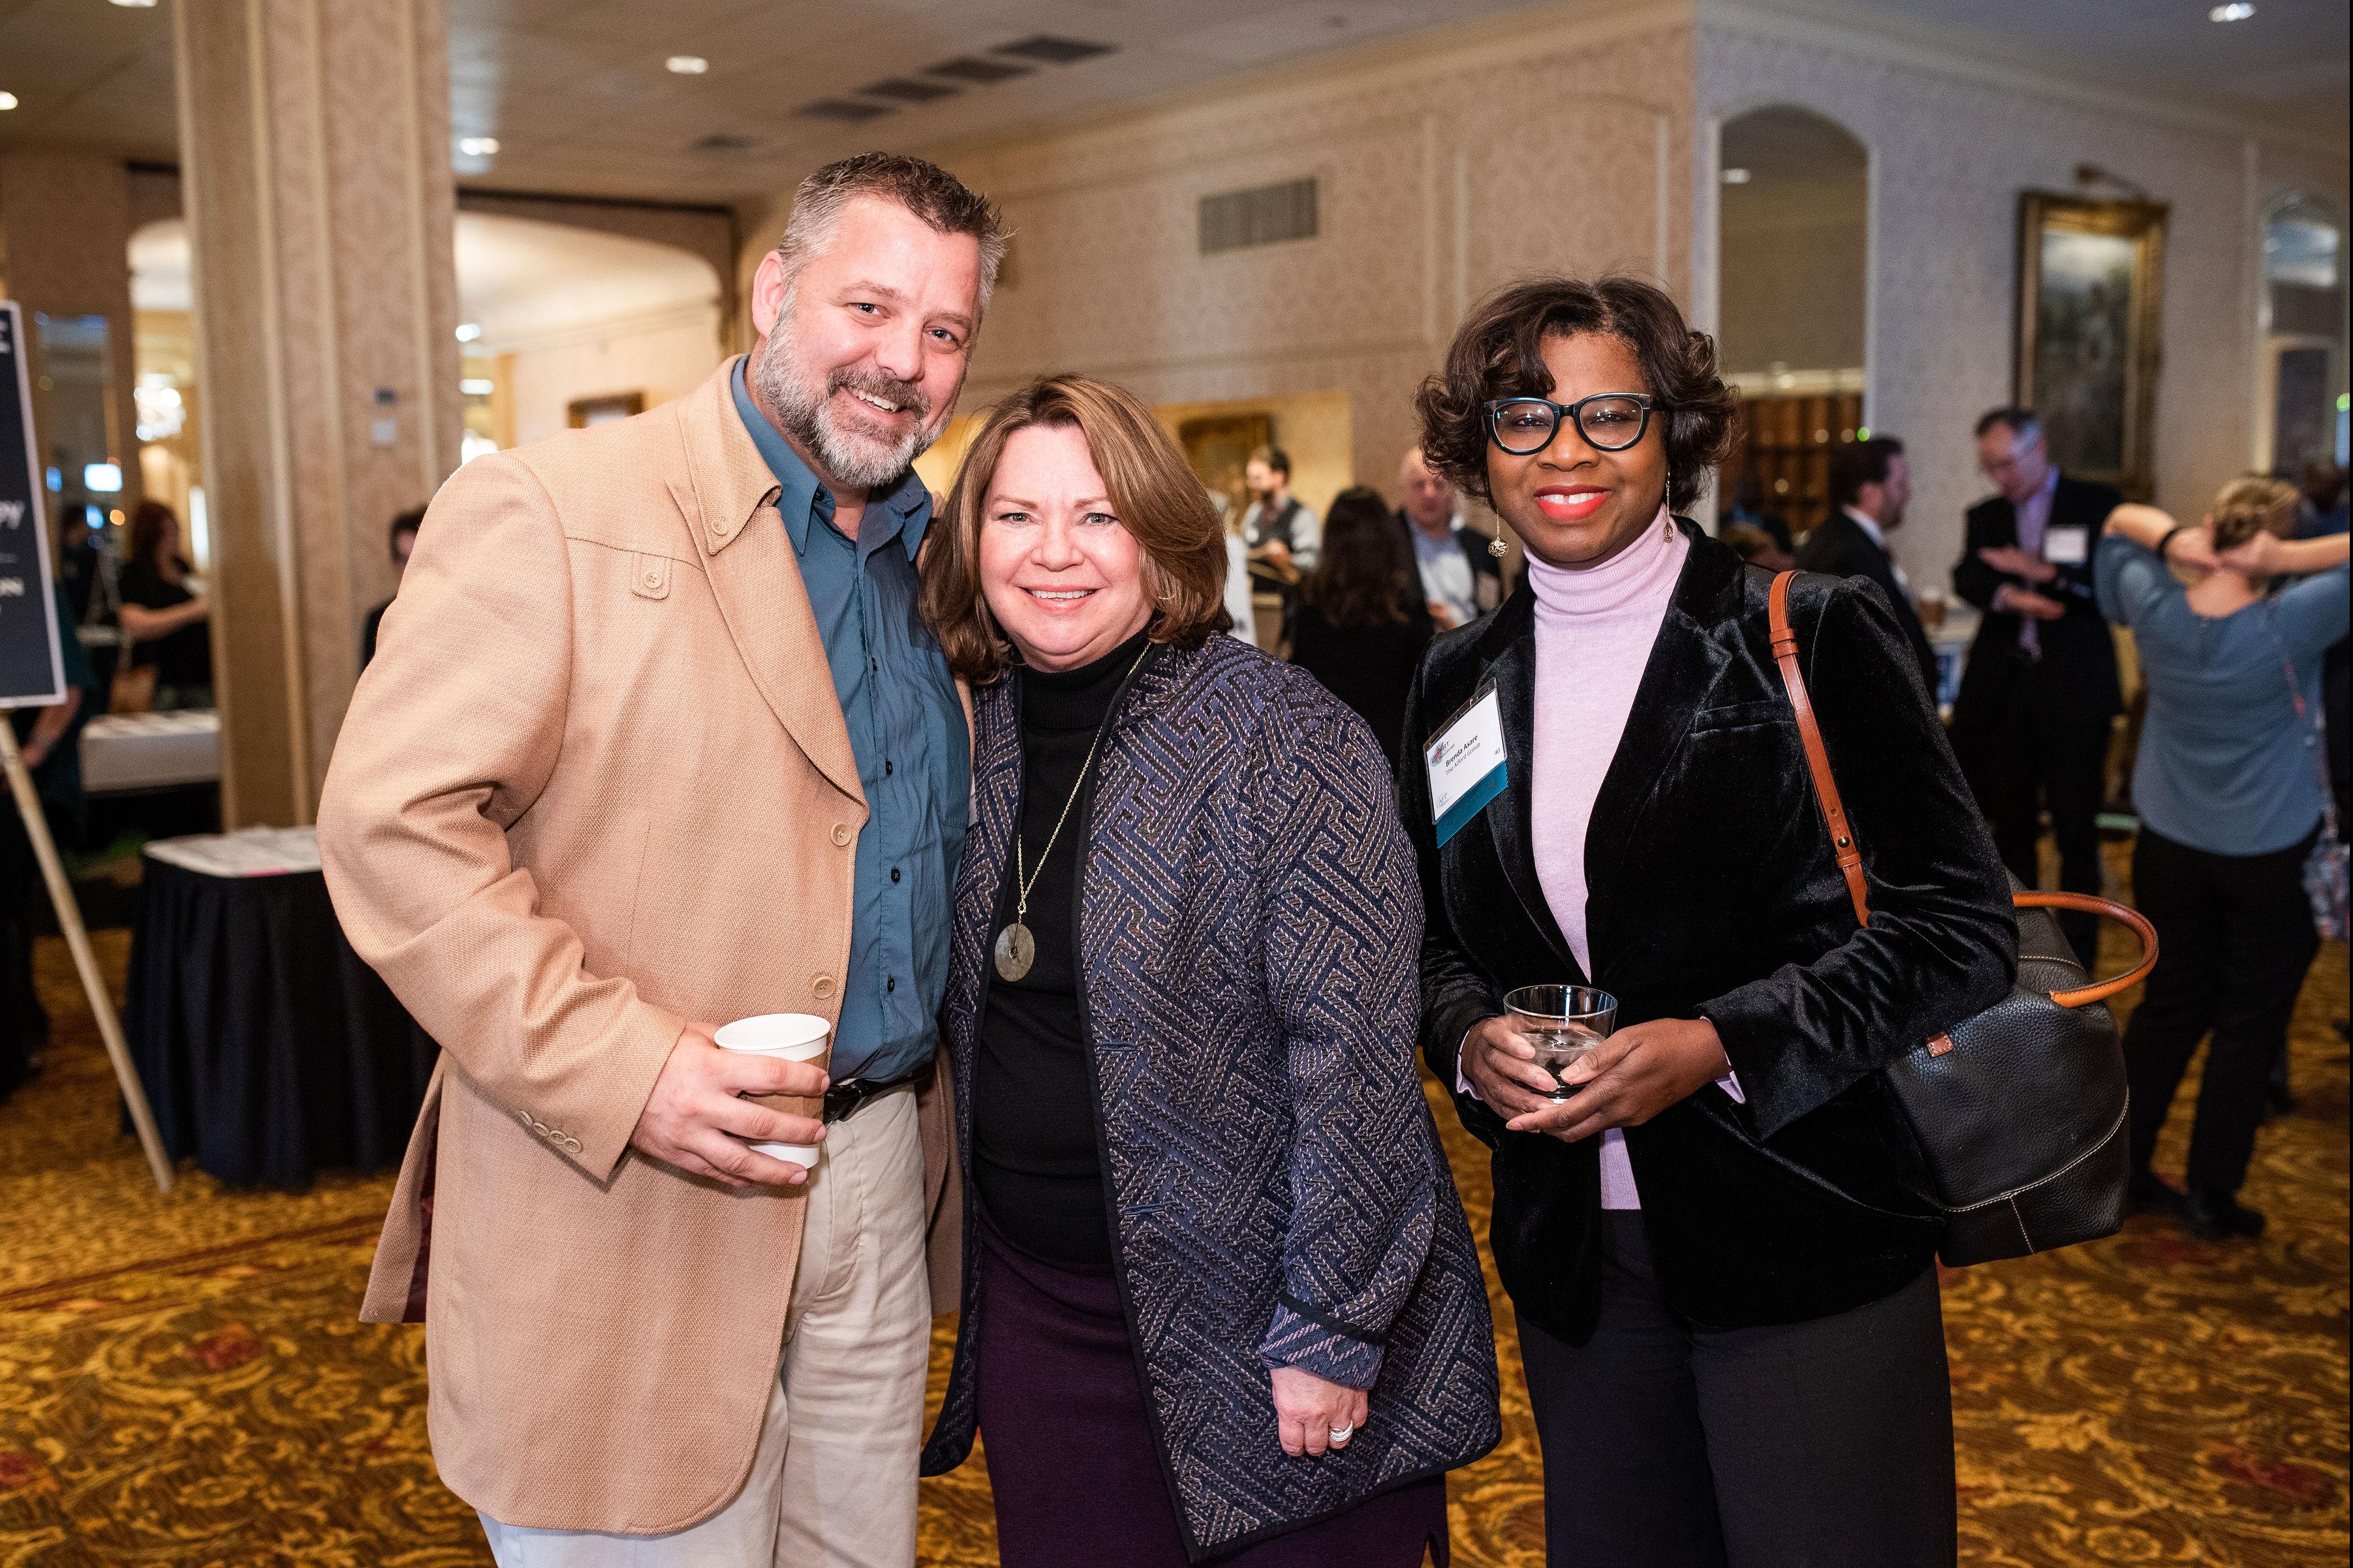 2019 National Philanthropy Day Attendees